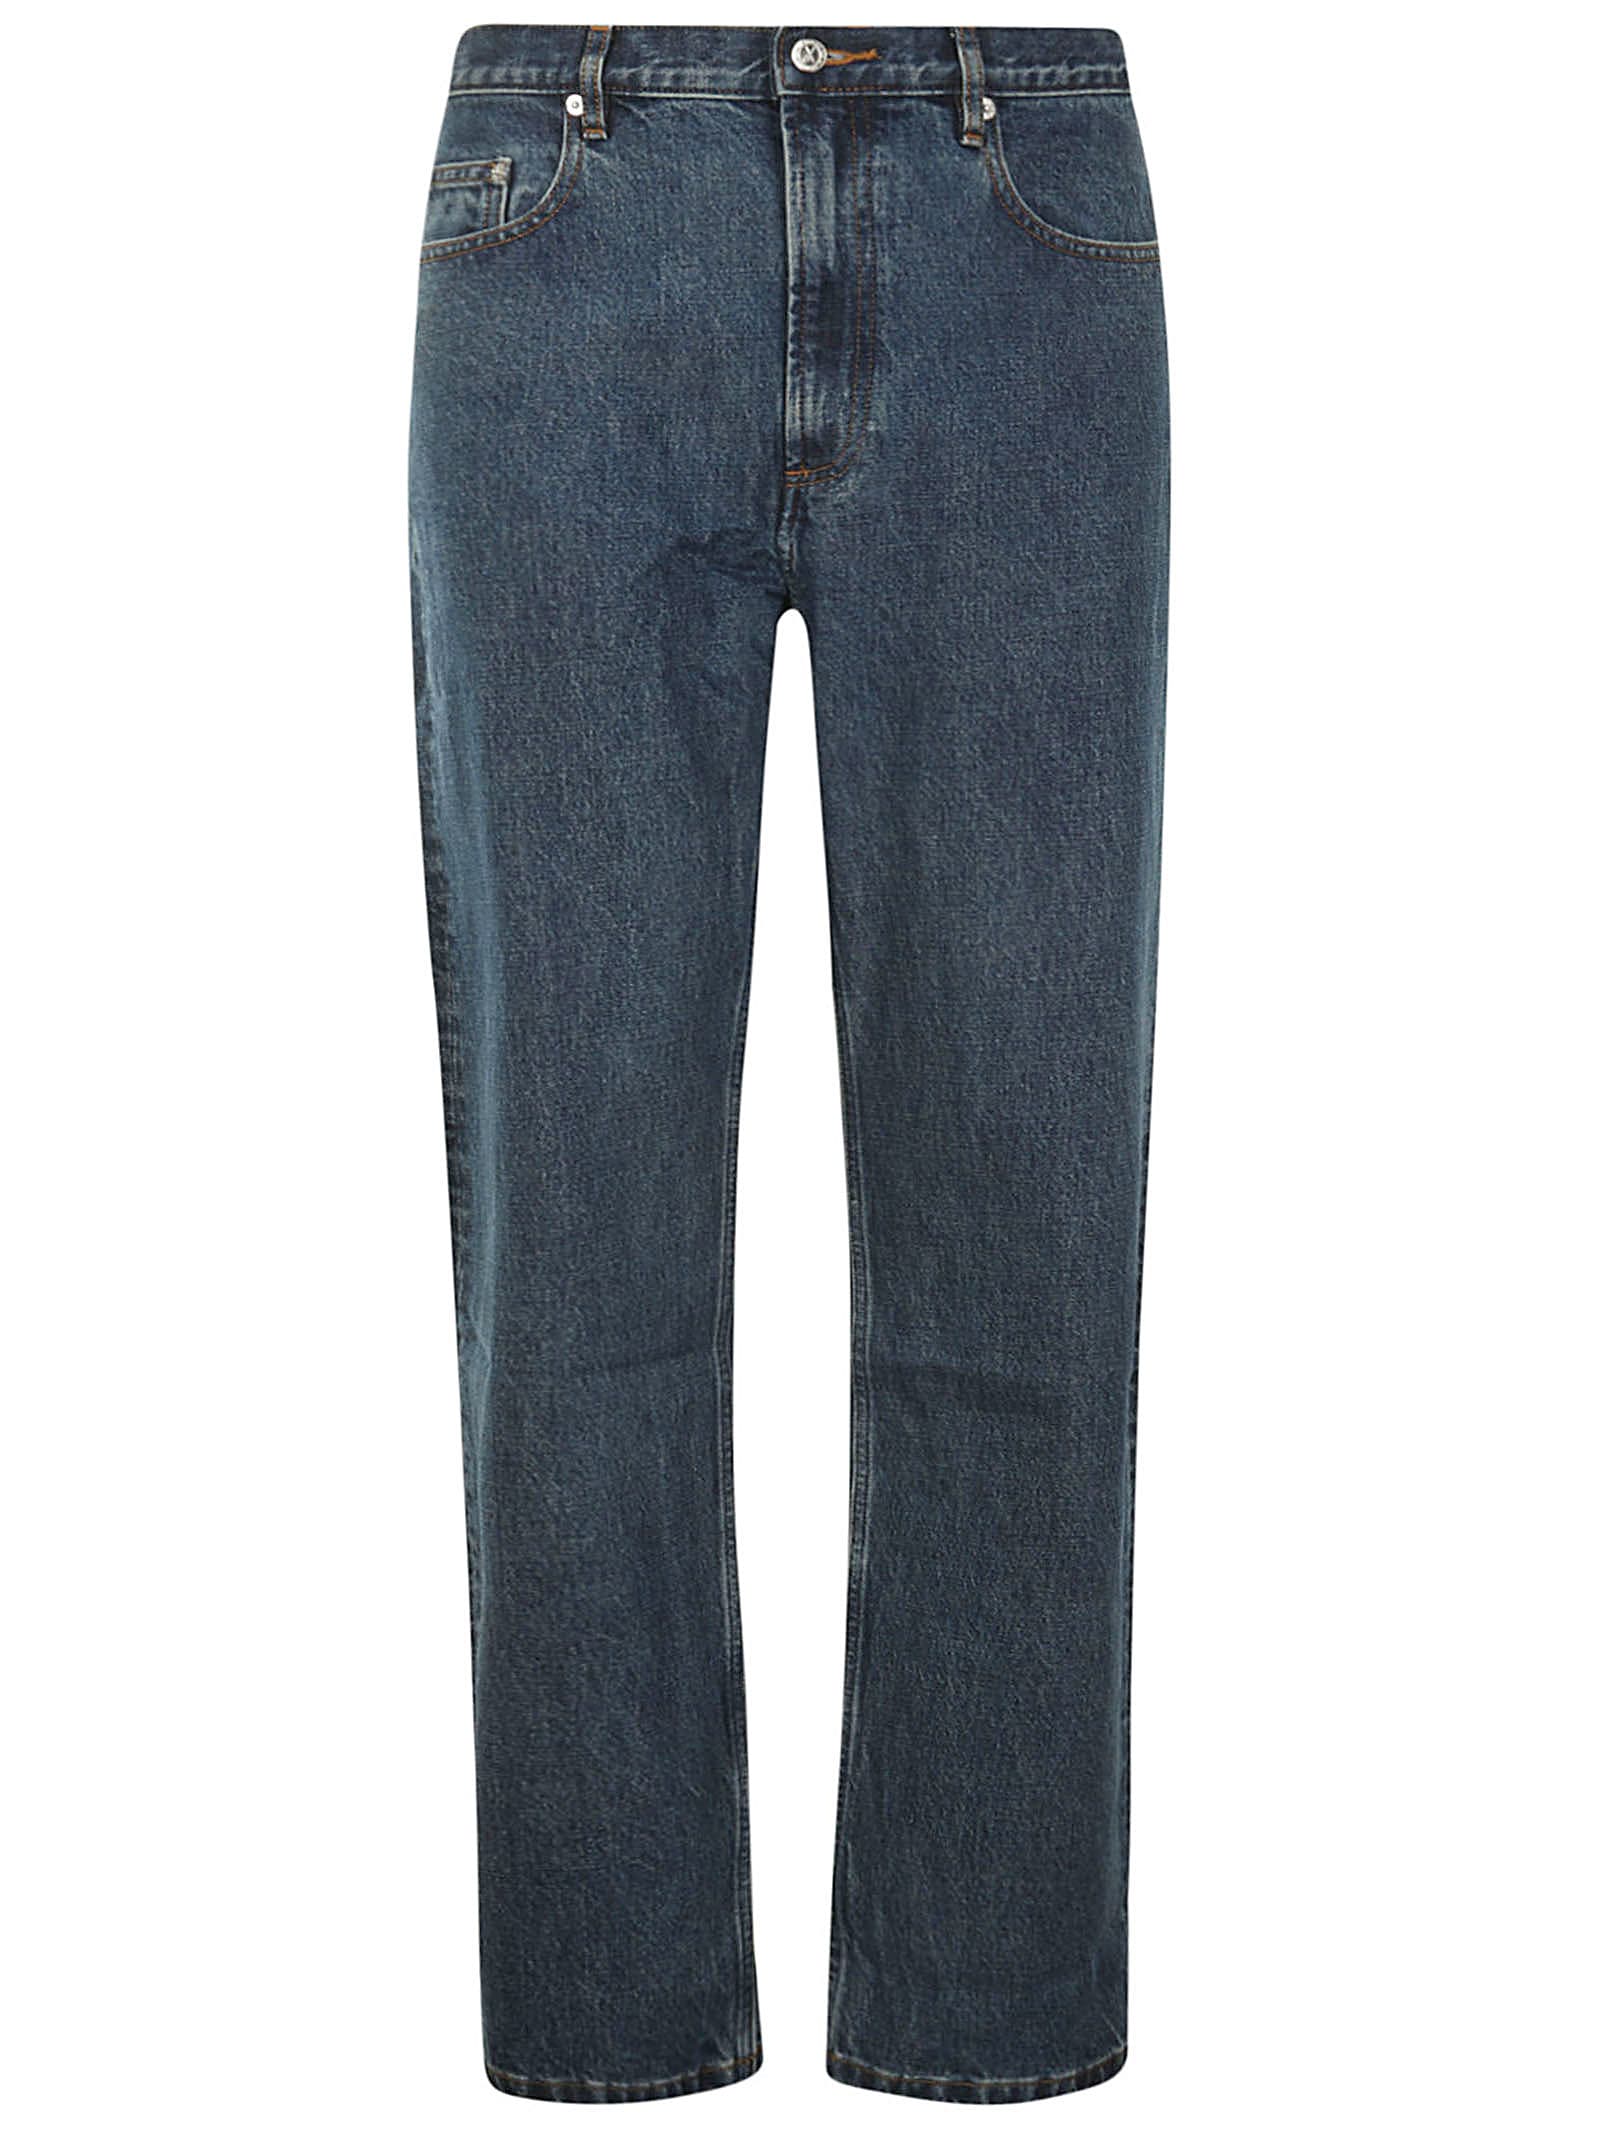 Apc Relaxed Jean H In Ial Washed Indigo